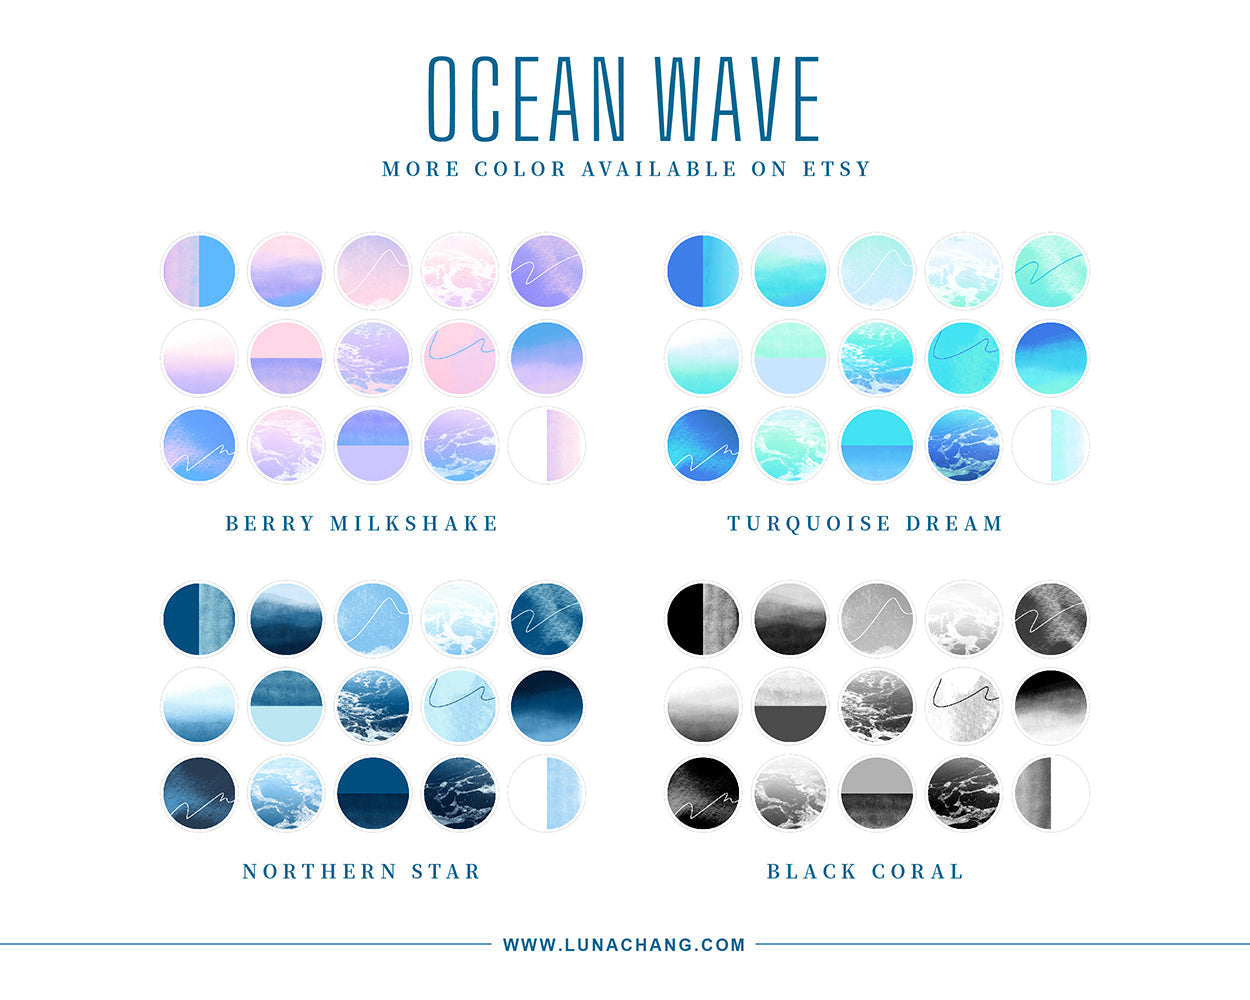 Ocean Wave - Black Coral | Instagram Story Highlight Icon